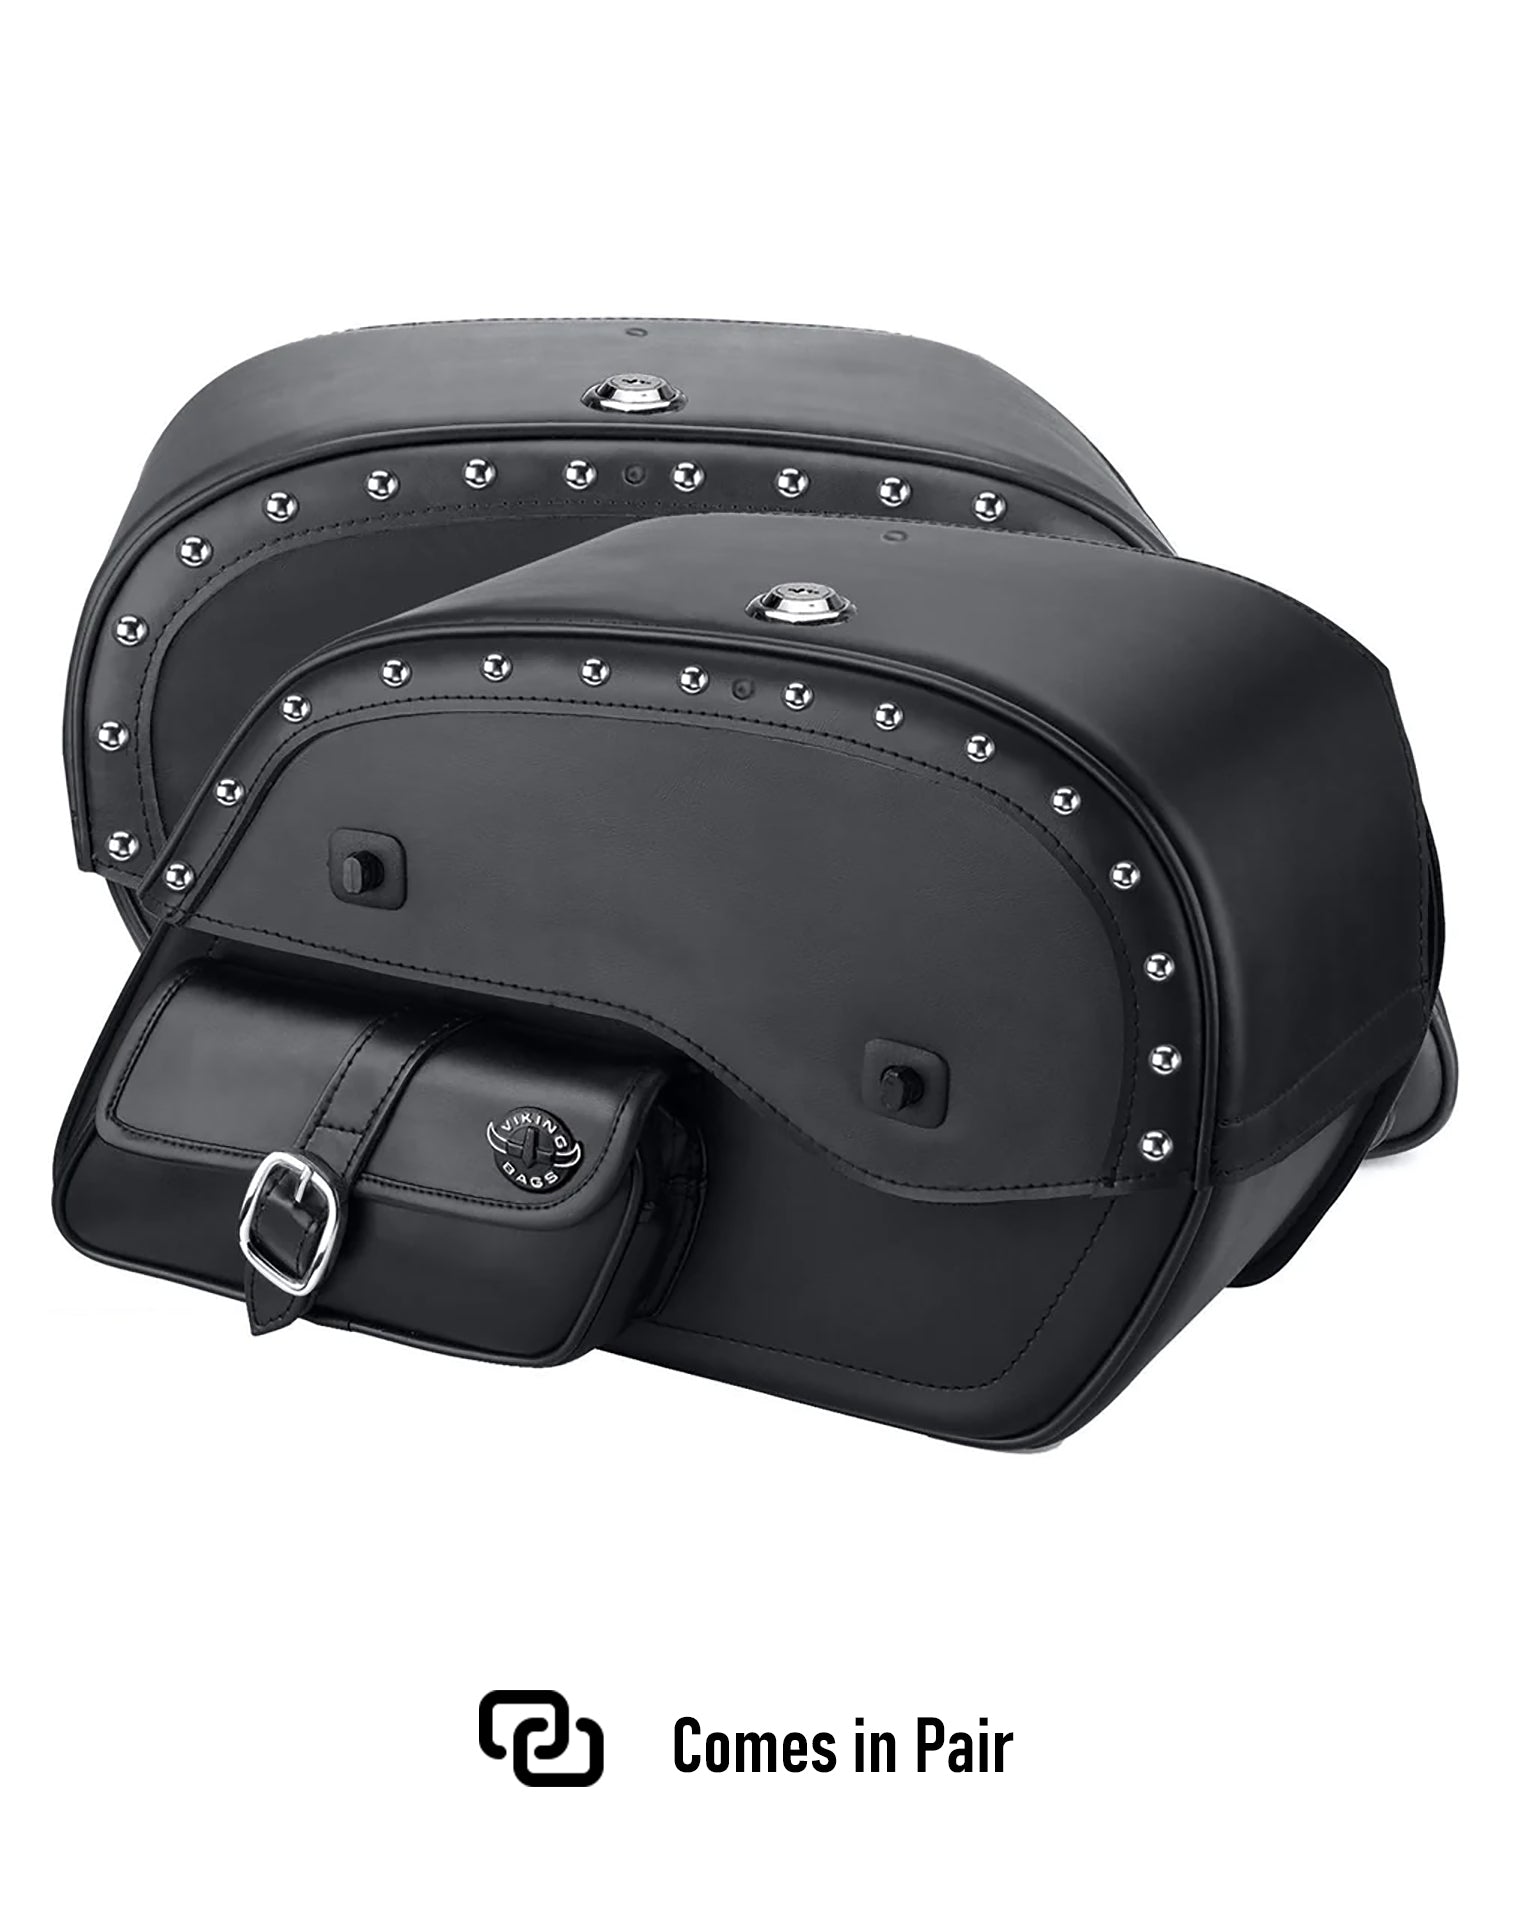 Viking Essential Side Pocket Large Studded Kawasaki Vulcan 1700 Classic Vn1700 Leather Motorcycle Saddlebags Comes in Pair